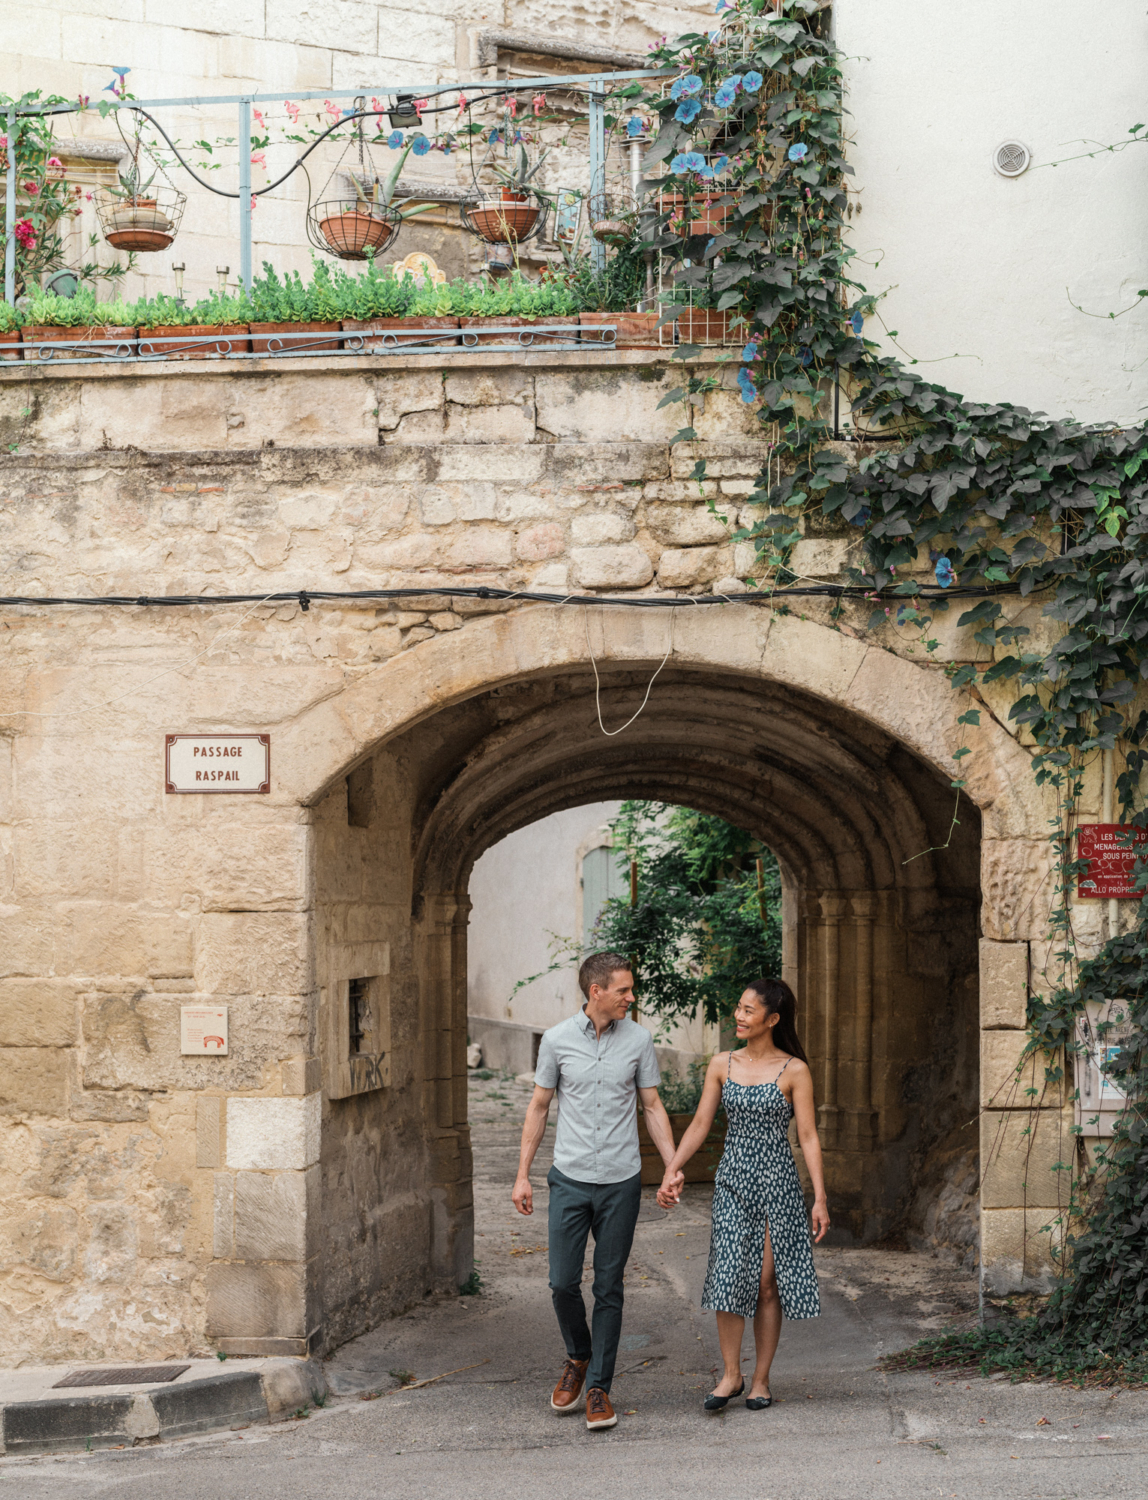 smiling couple walking through medieval archway